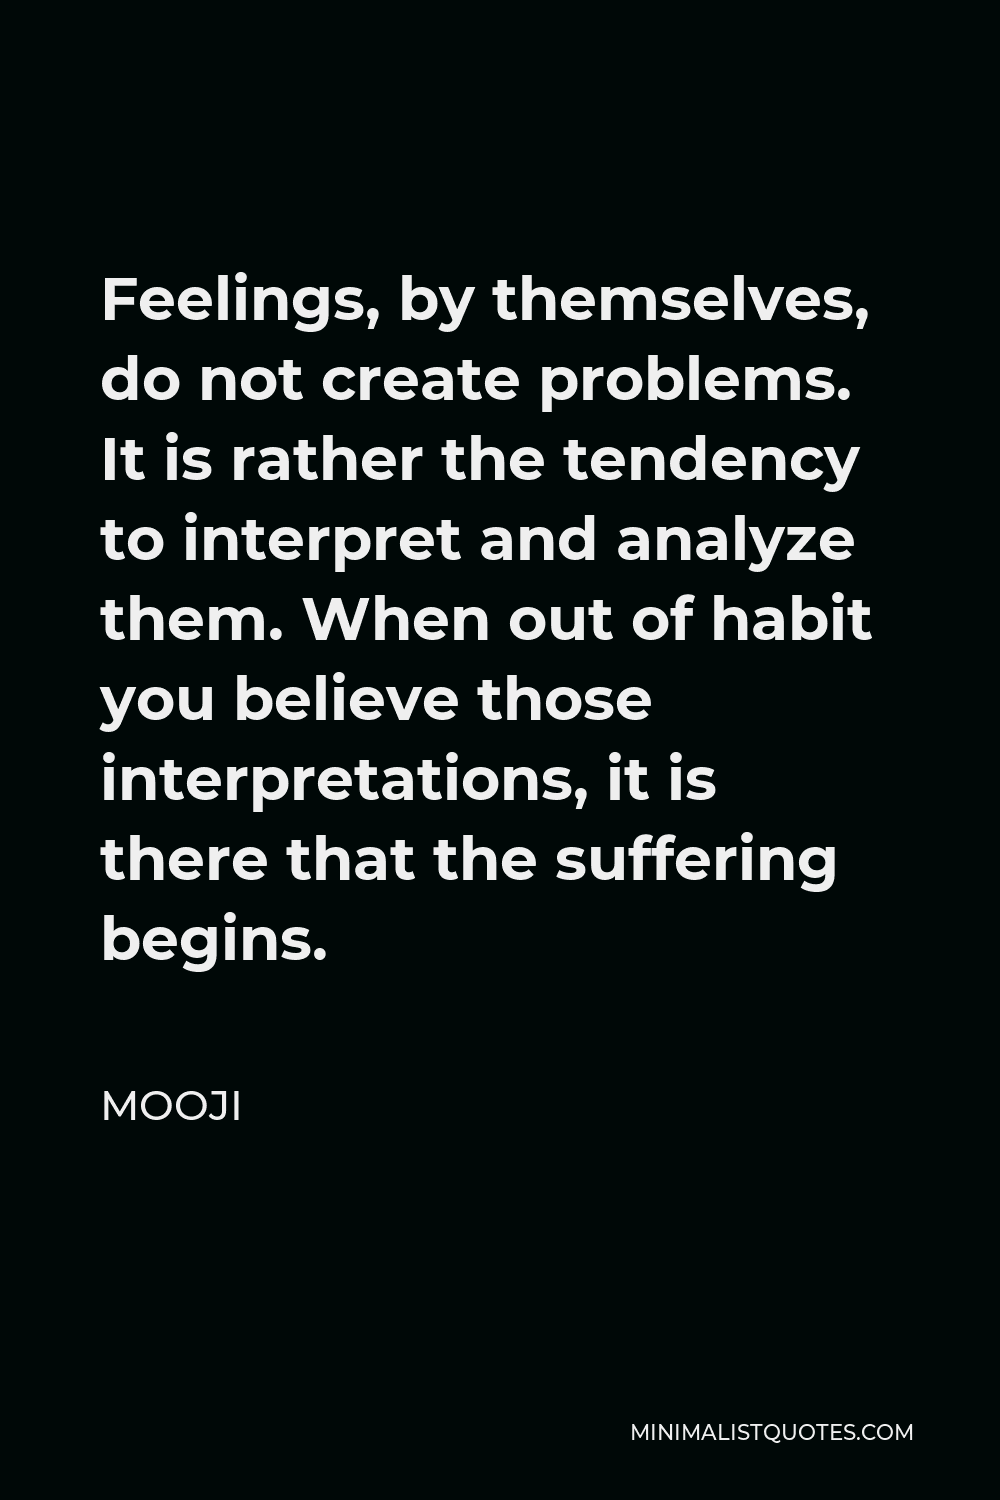 Mooji Quote - Feelings, by themselves, do not create problems. It is rather the tendency to interpret and analyze them. When out of habit you believe those interpretations, it is there that the suffering begins.